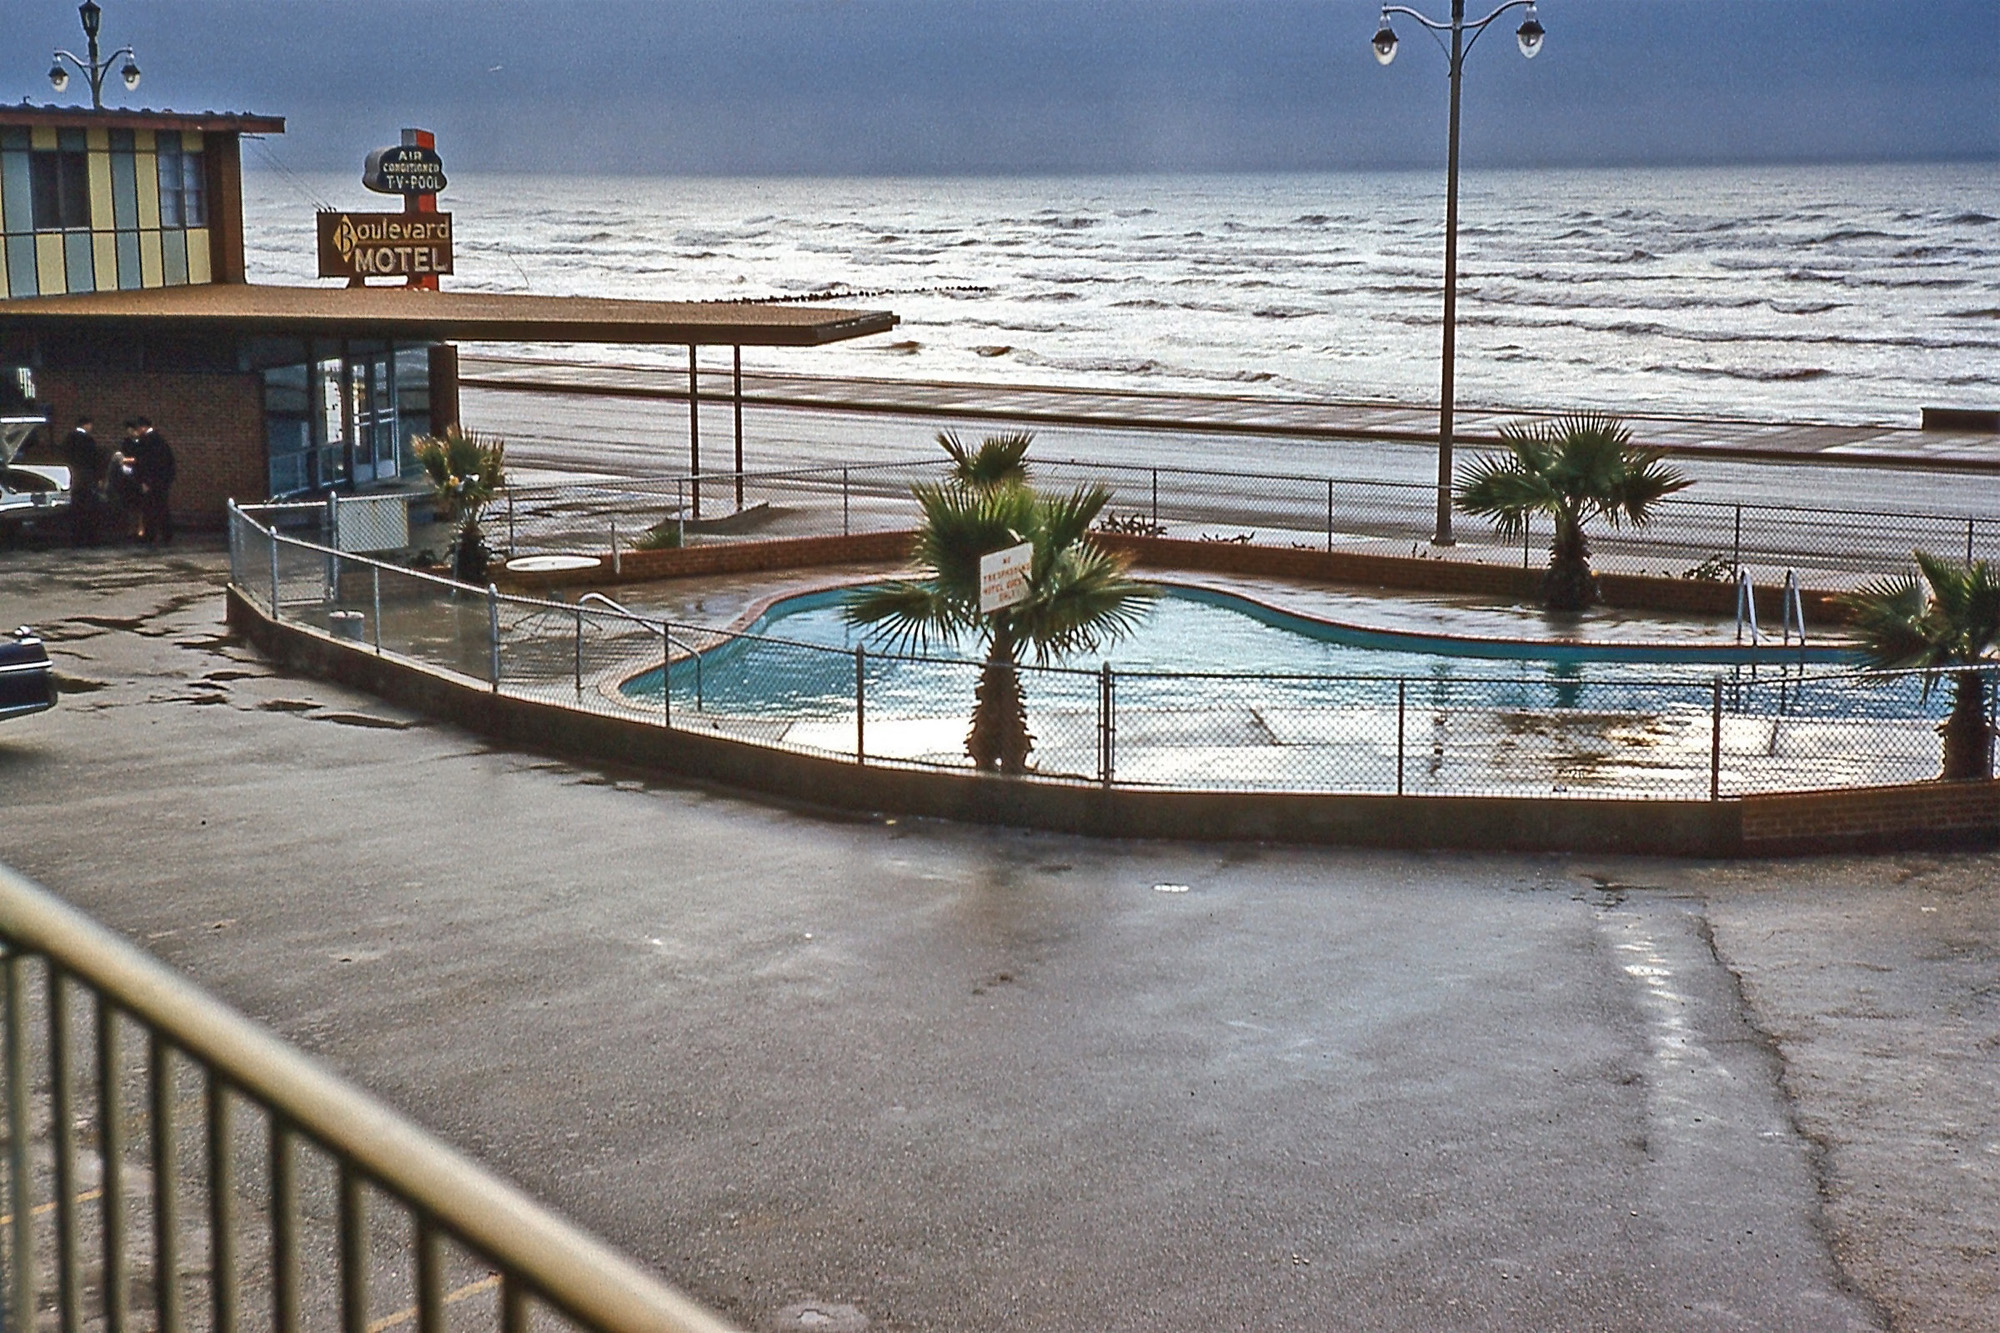 Galveston, Texas - another Kodachrome by my dad, taken in November, 1960. The weather looks ominous. View full size.